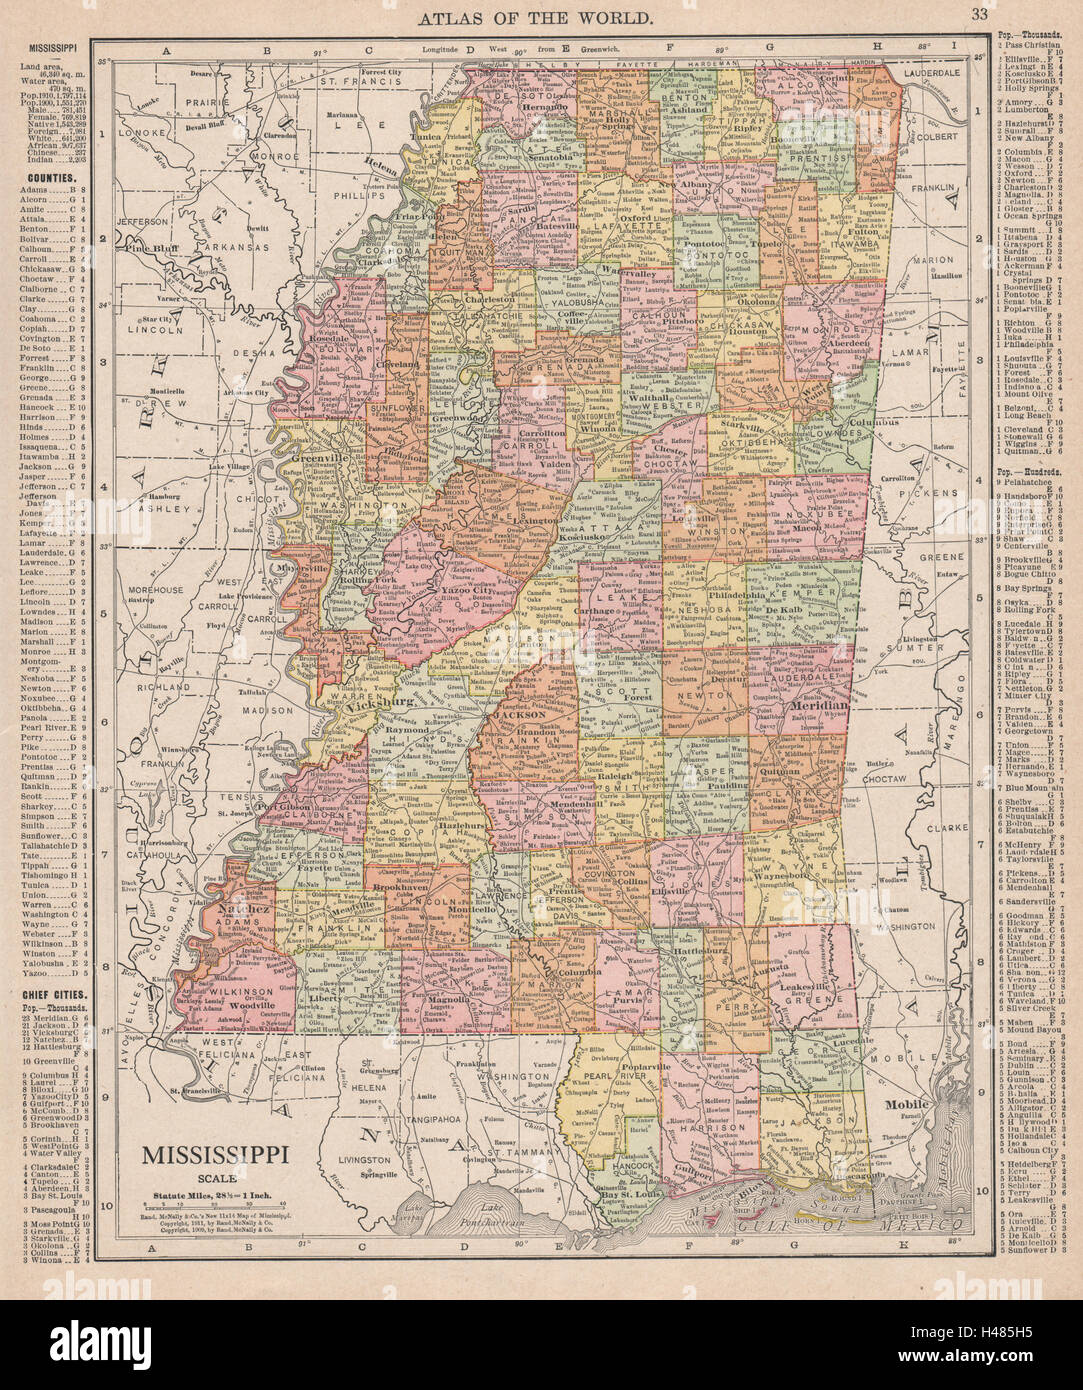 Mississippi state map showing counties. RAND MCNALLY 1912 old antique Stock Photo